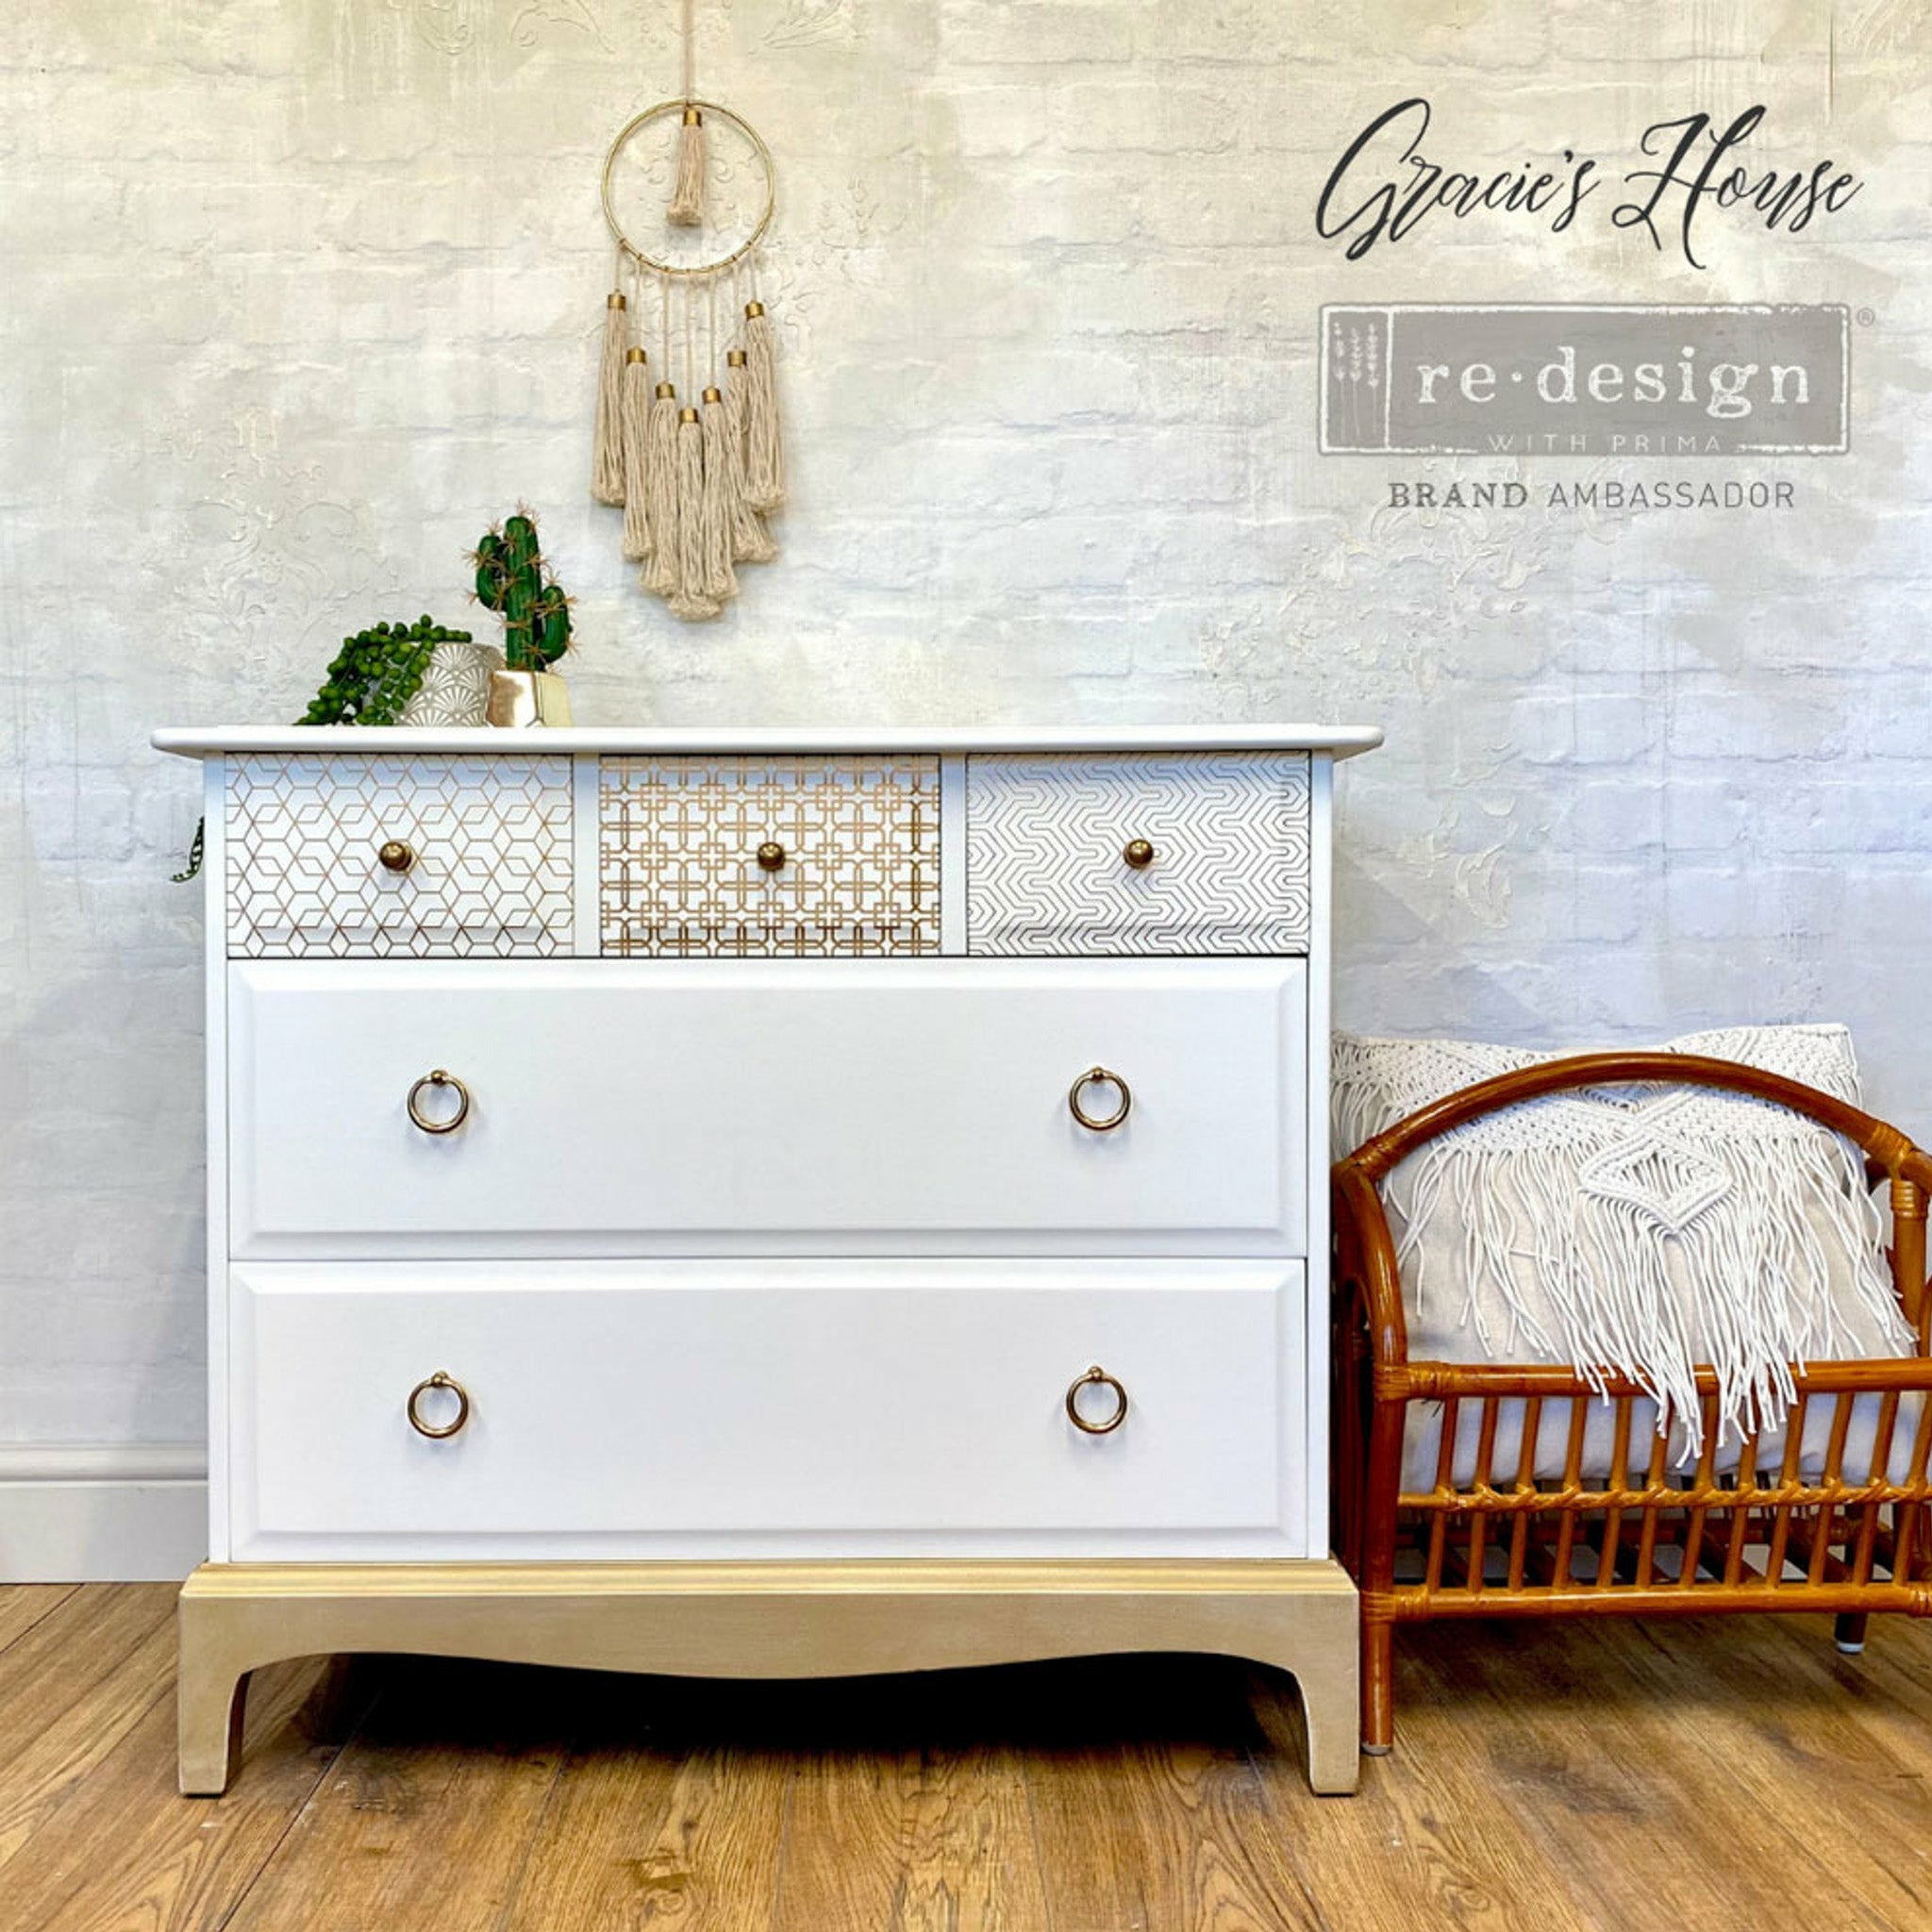 White dresser with the Motif Geometrique transfer on top. A black Gracies House Redesign brand ambassador logo on the top right.